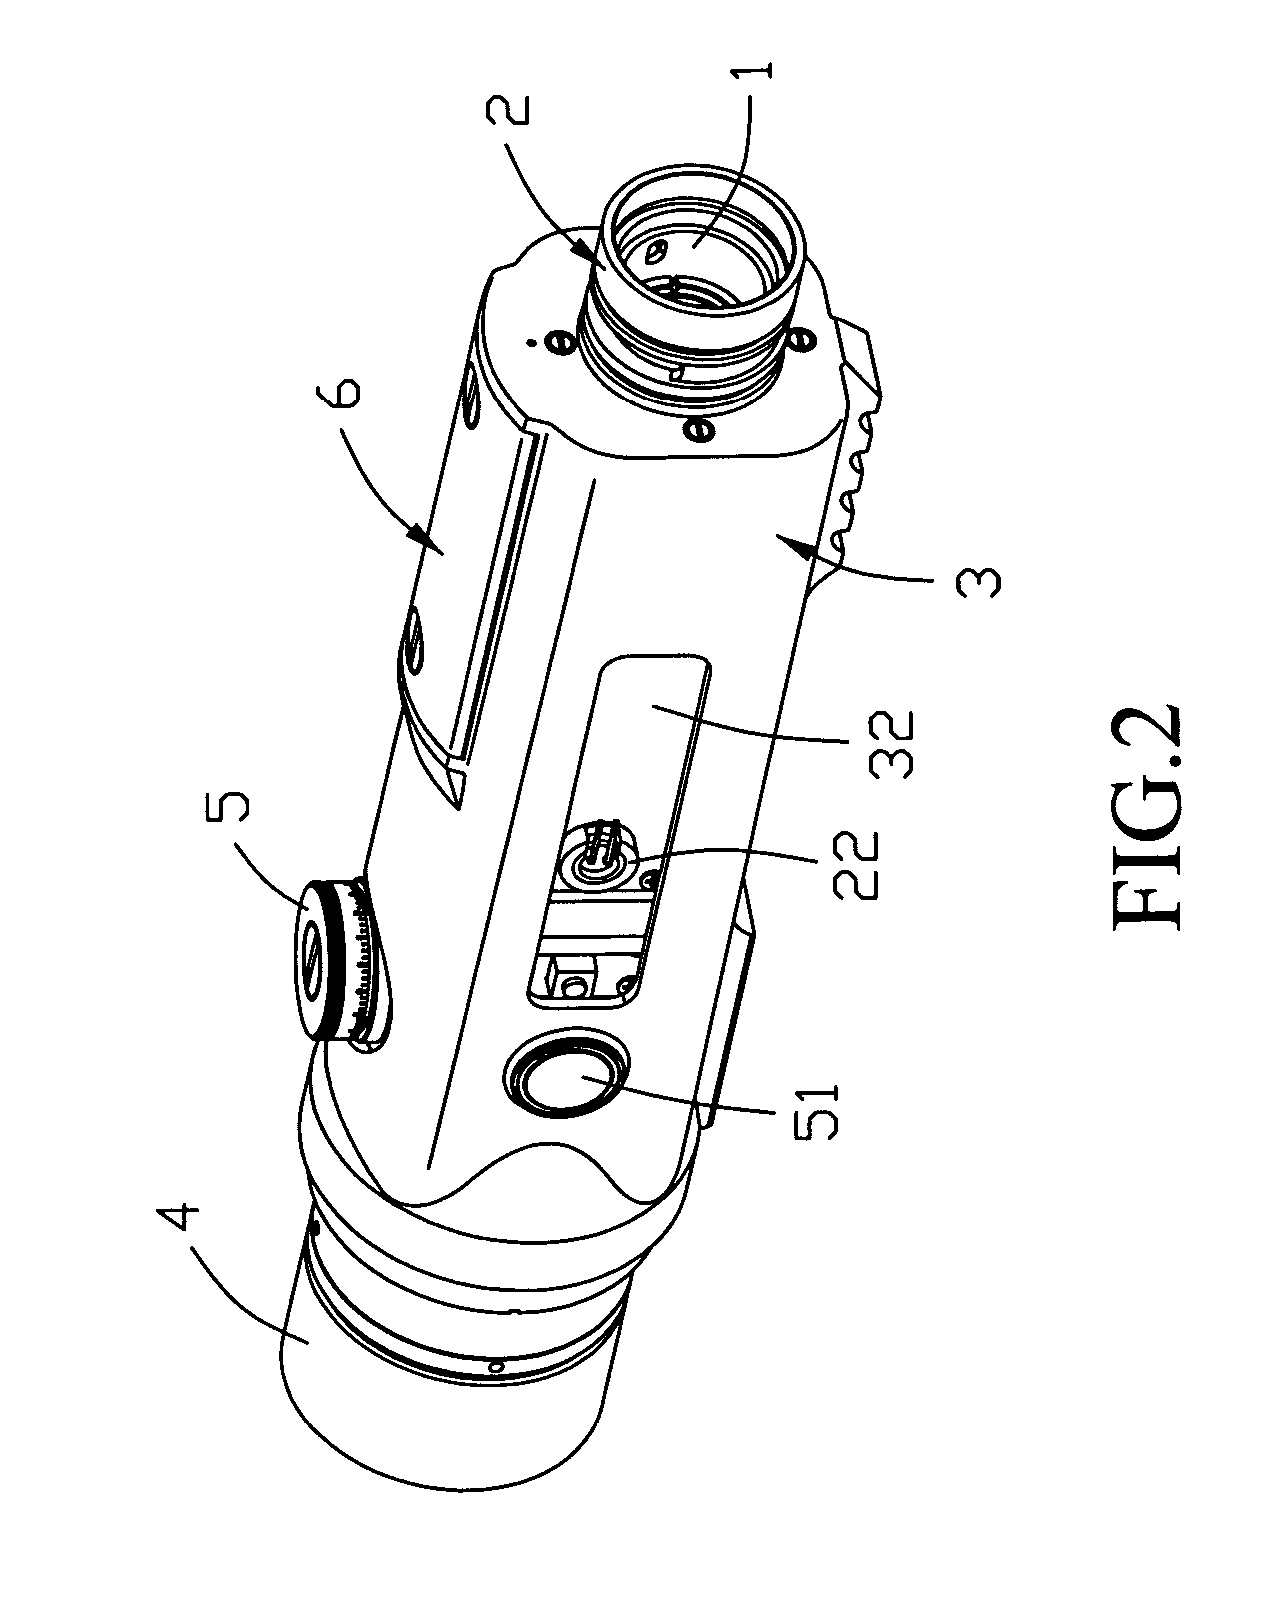 Optical sight with rangefinder and assembly method for the same